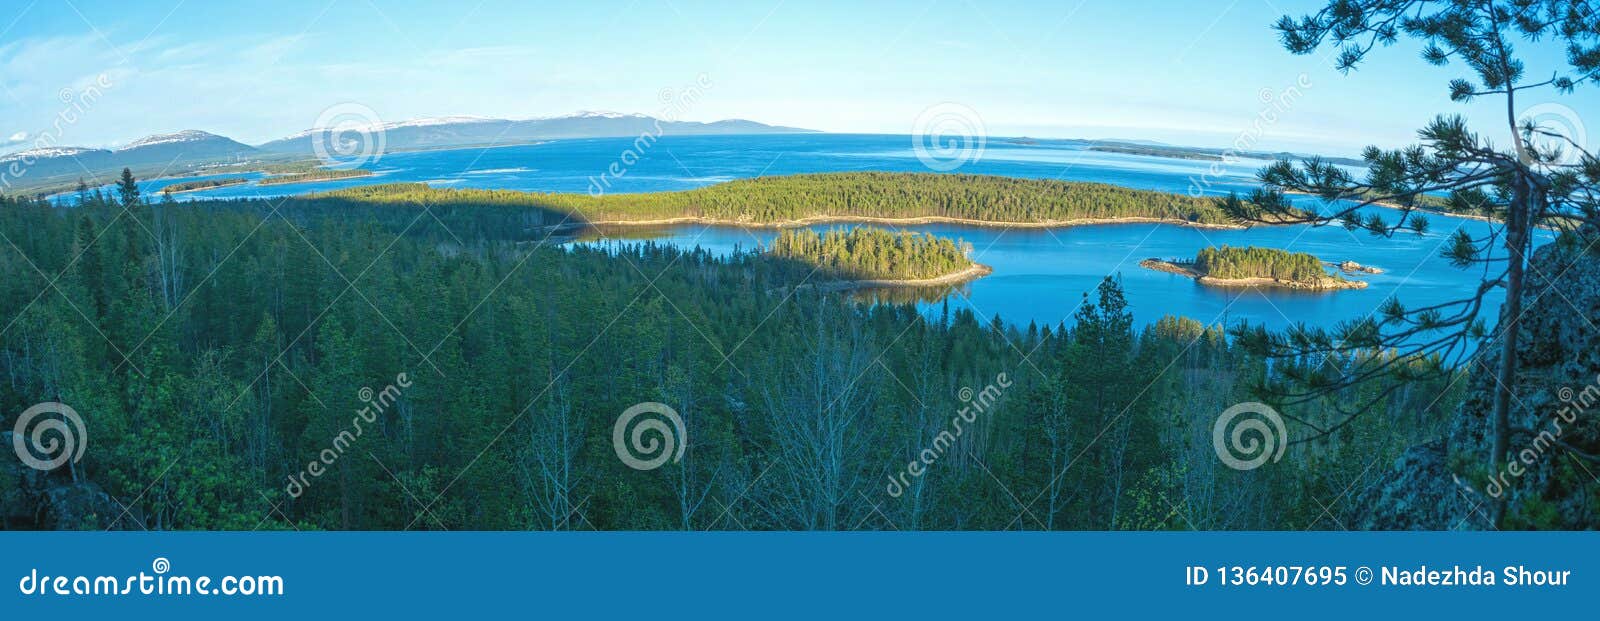 small islands in the kandalaksha bay of the white sea